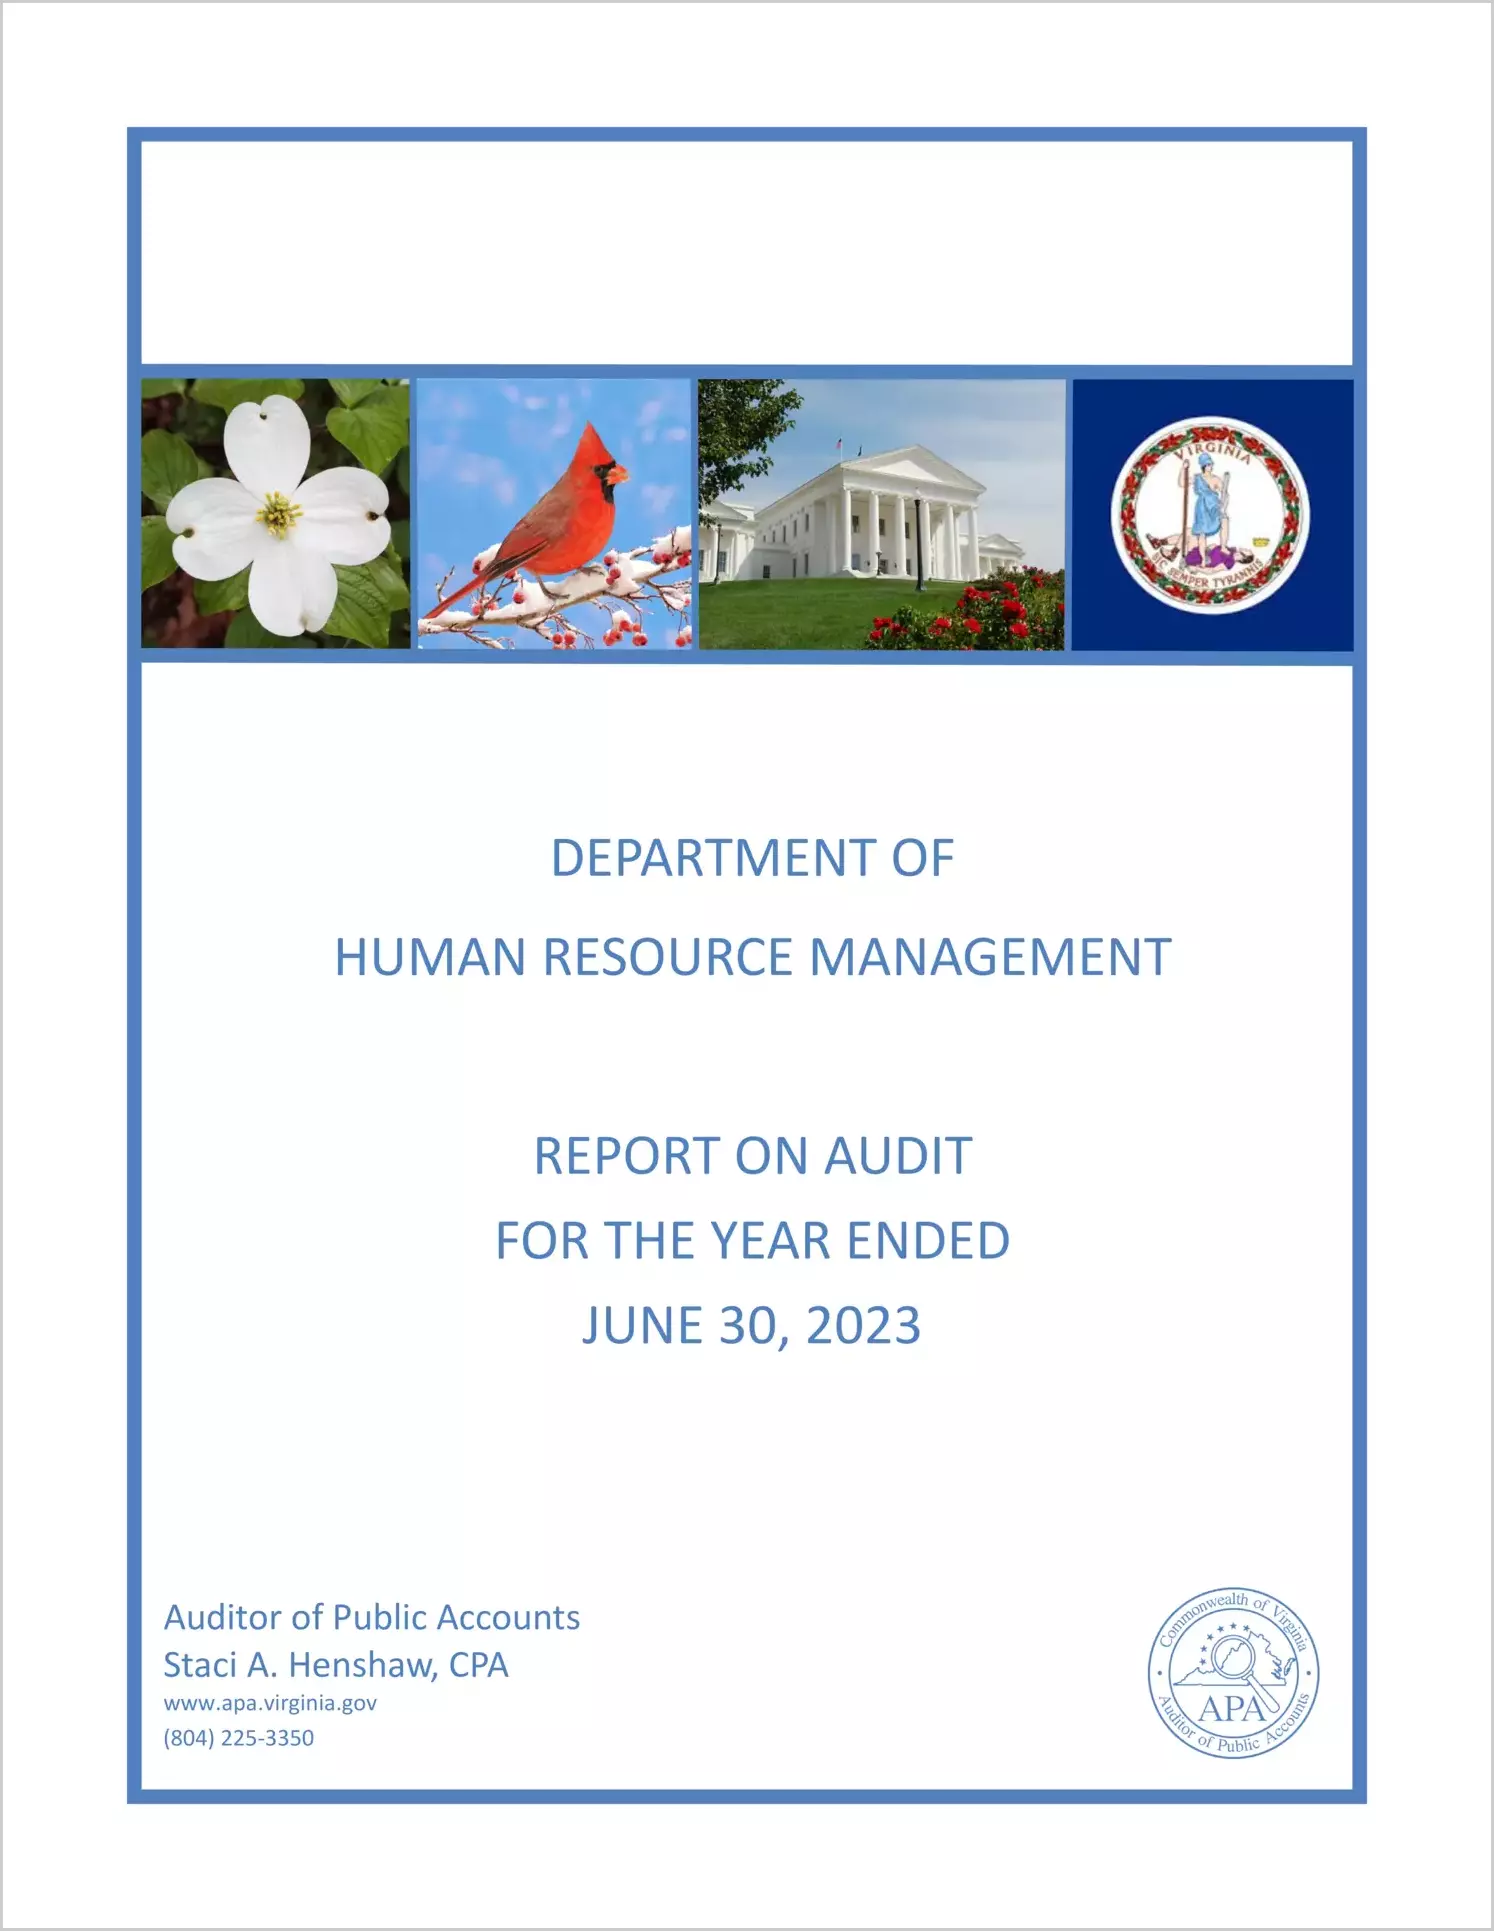 Department of Human Resource Management for the year ended June 30, 2023